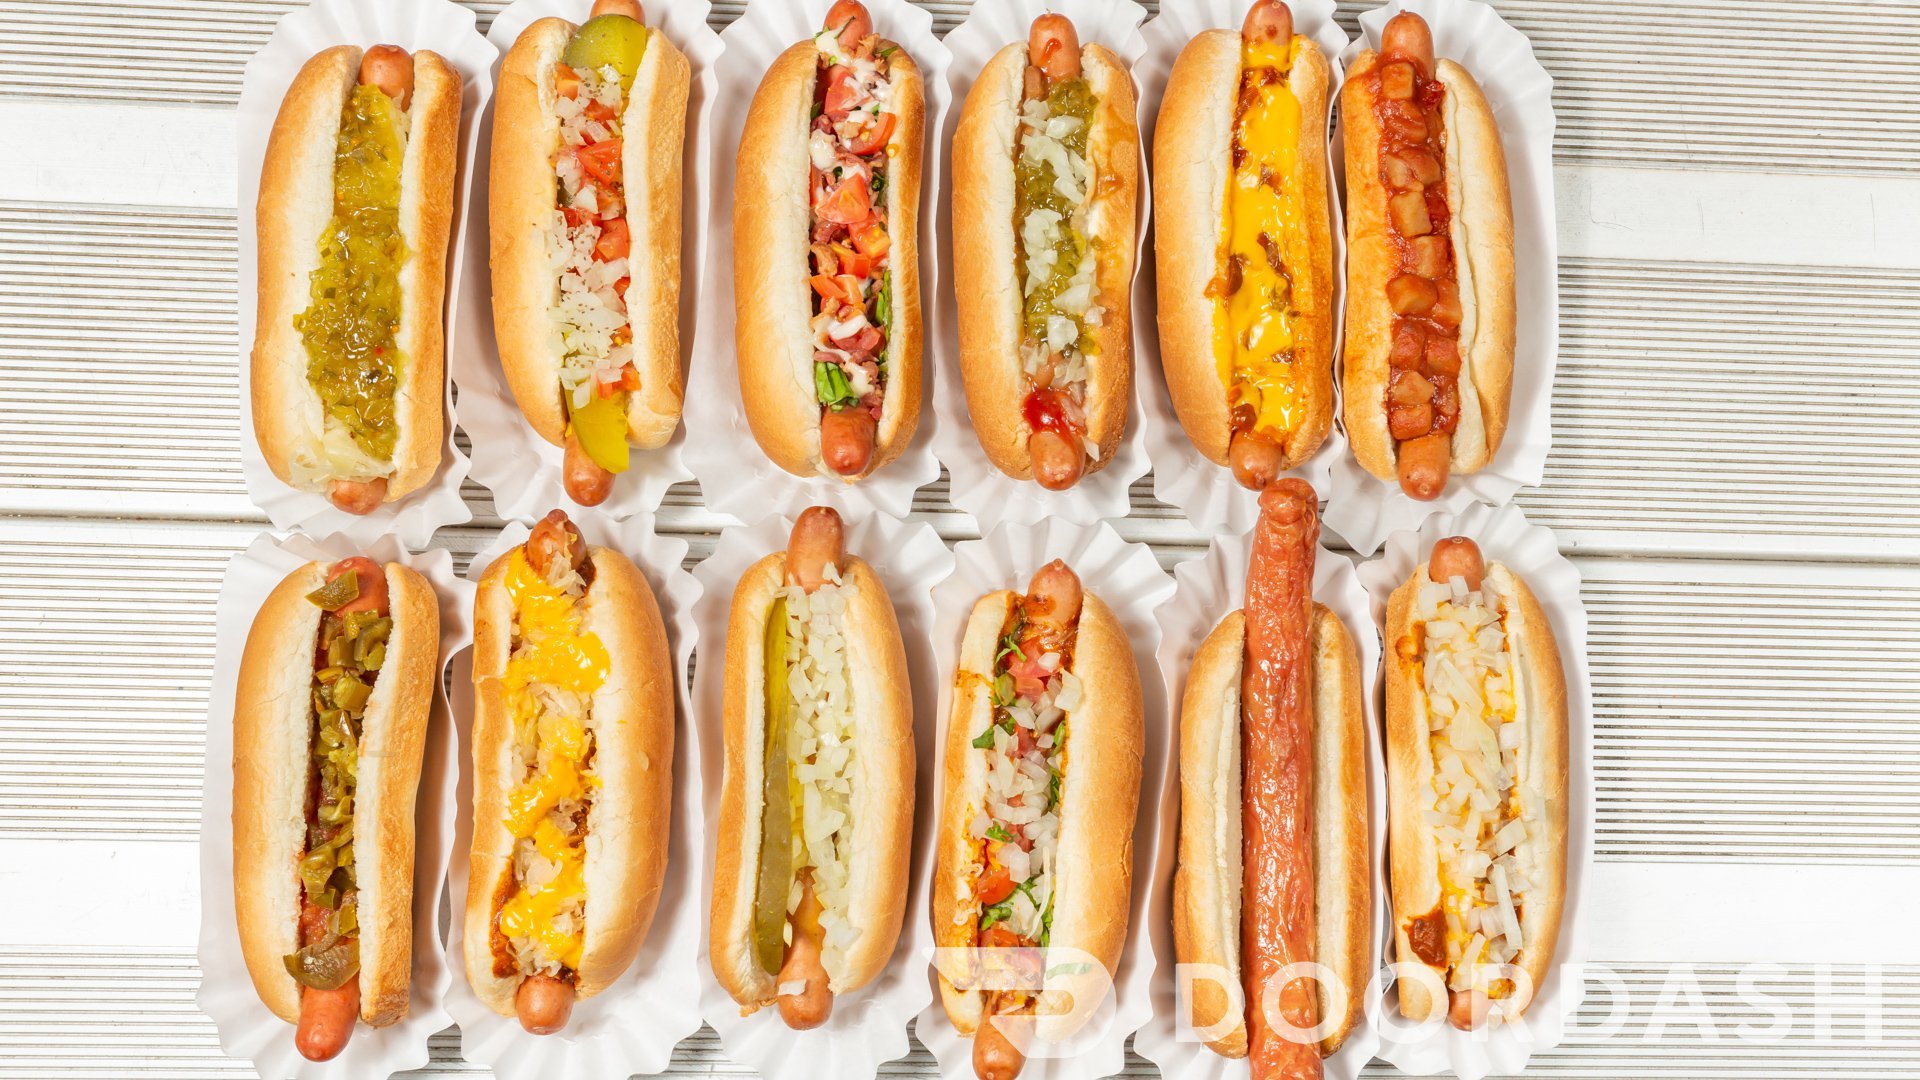 Top 4 places in New Jersey to get the best hot dog